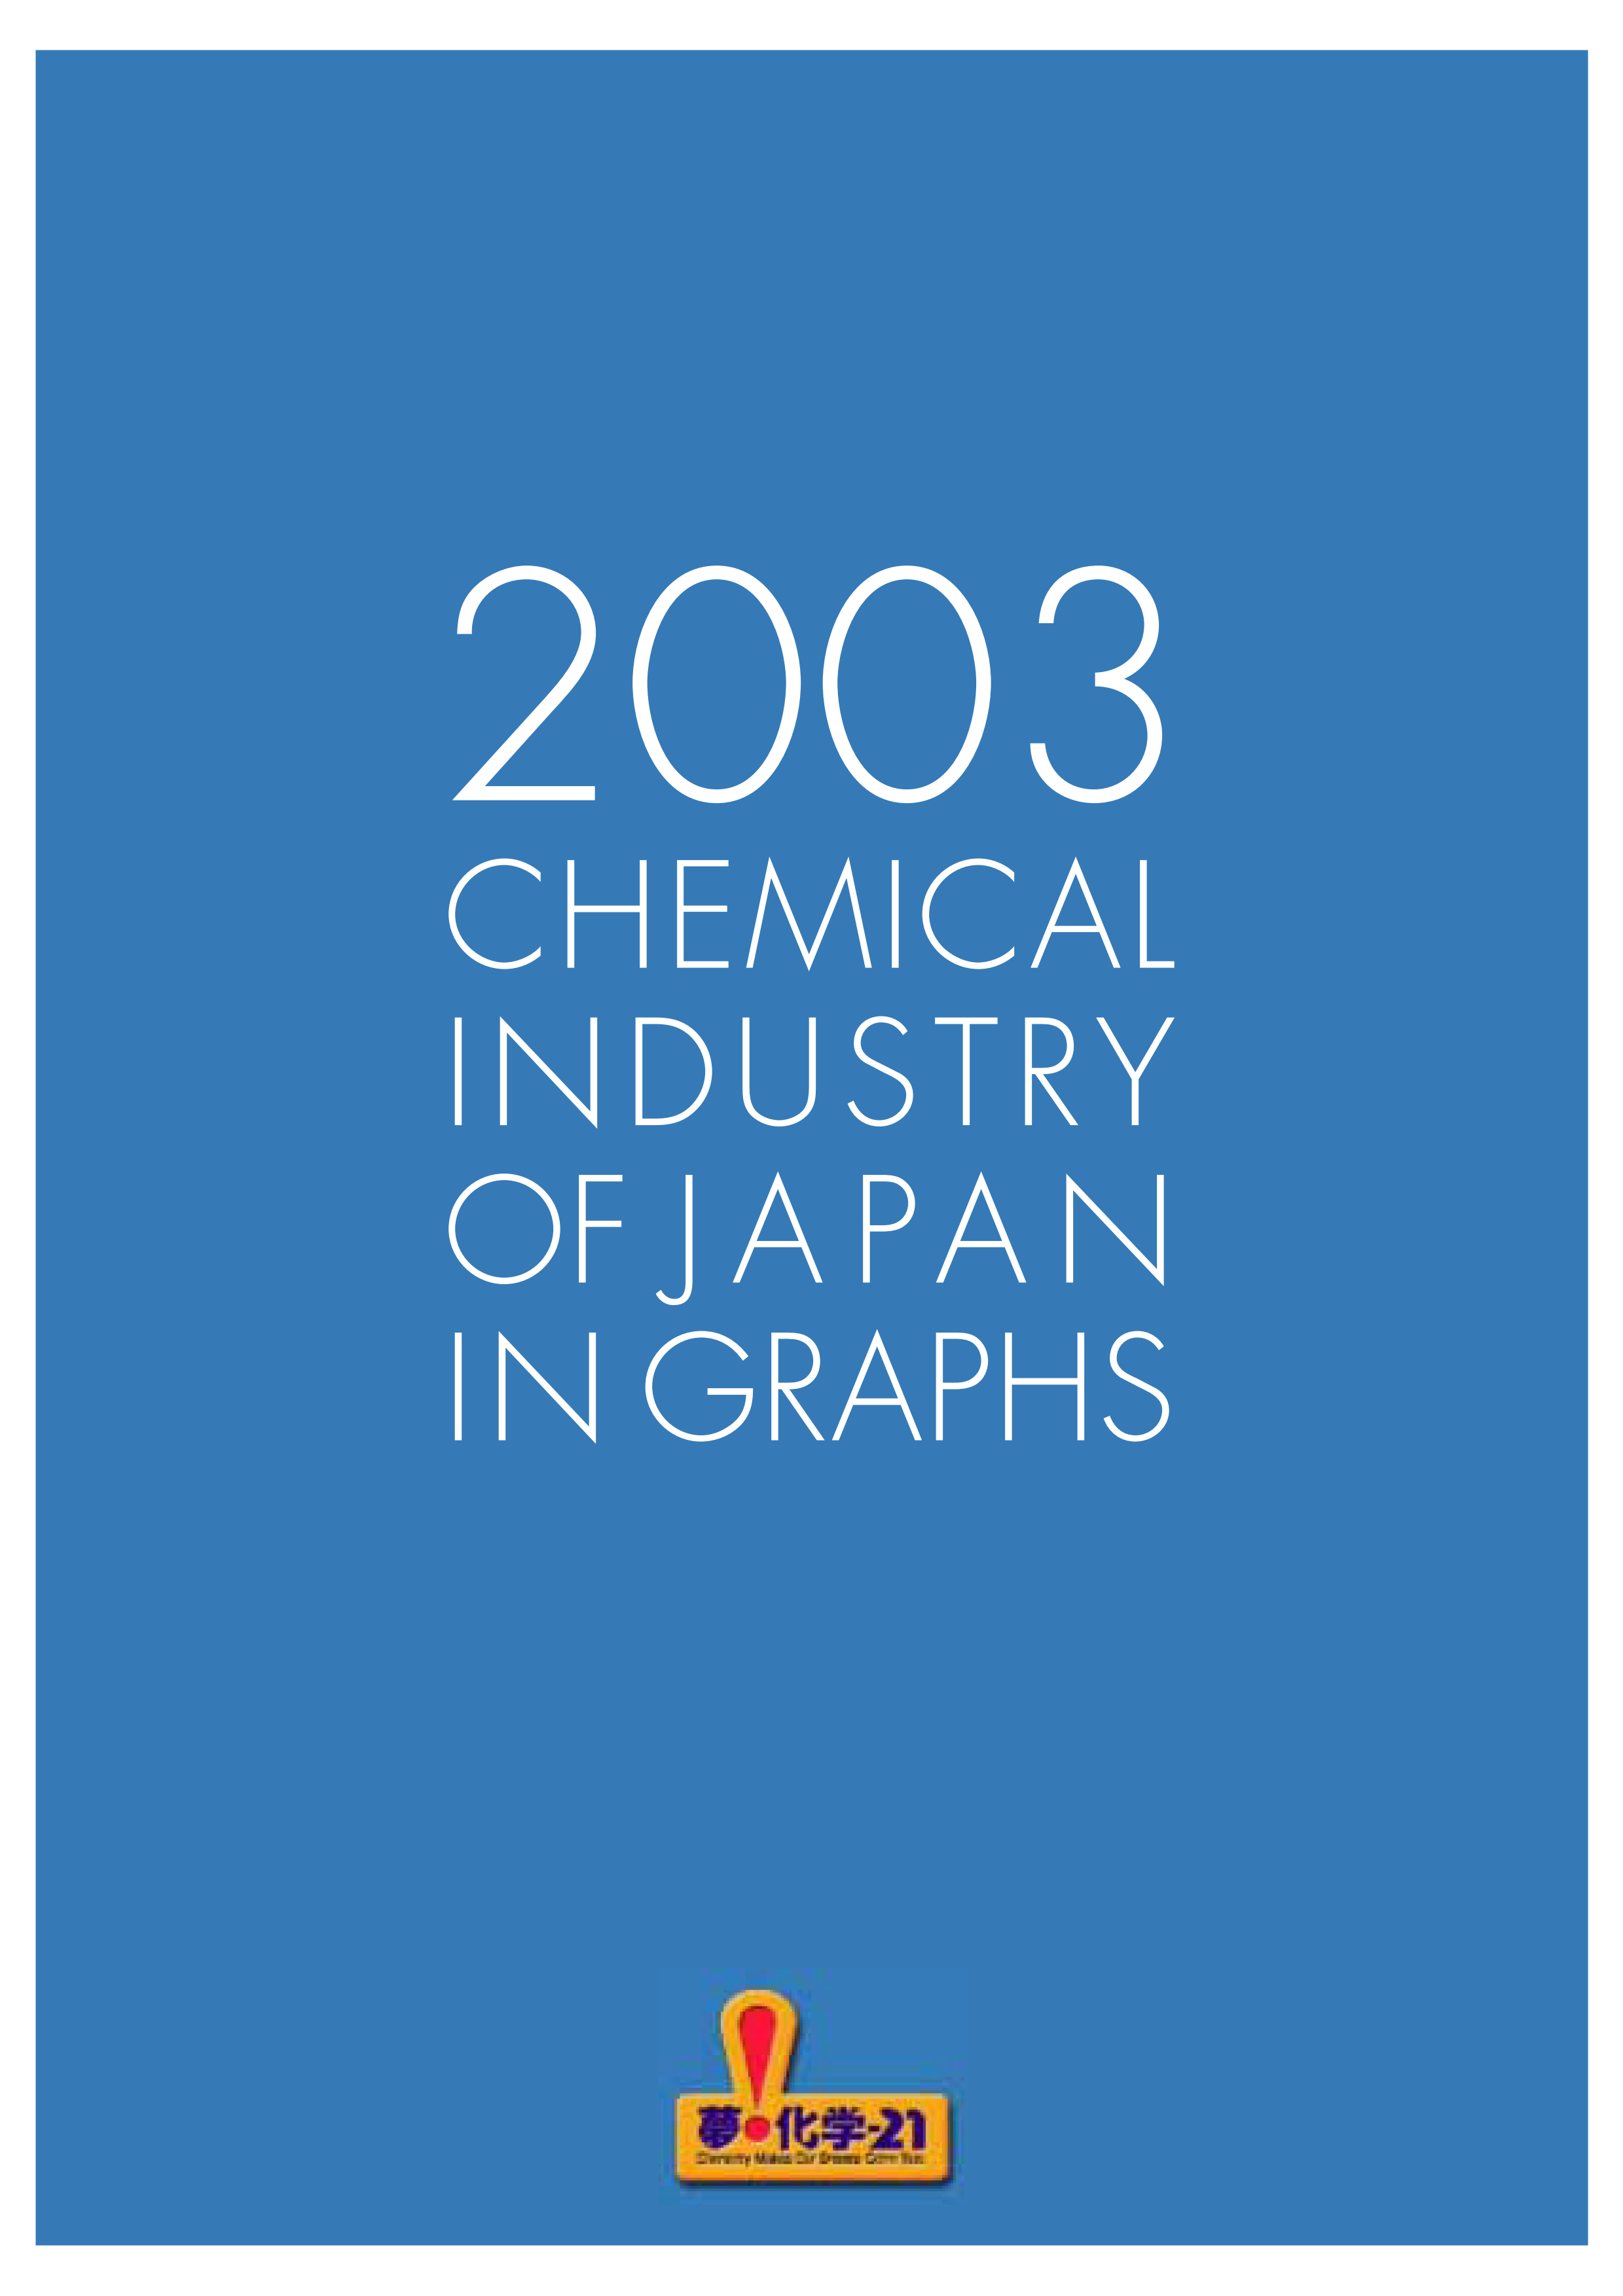 2003 CHEMICAL INDUSTRY OF JAPAN IN GRAPHS